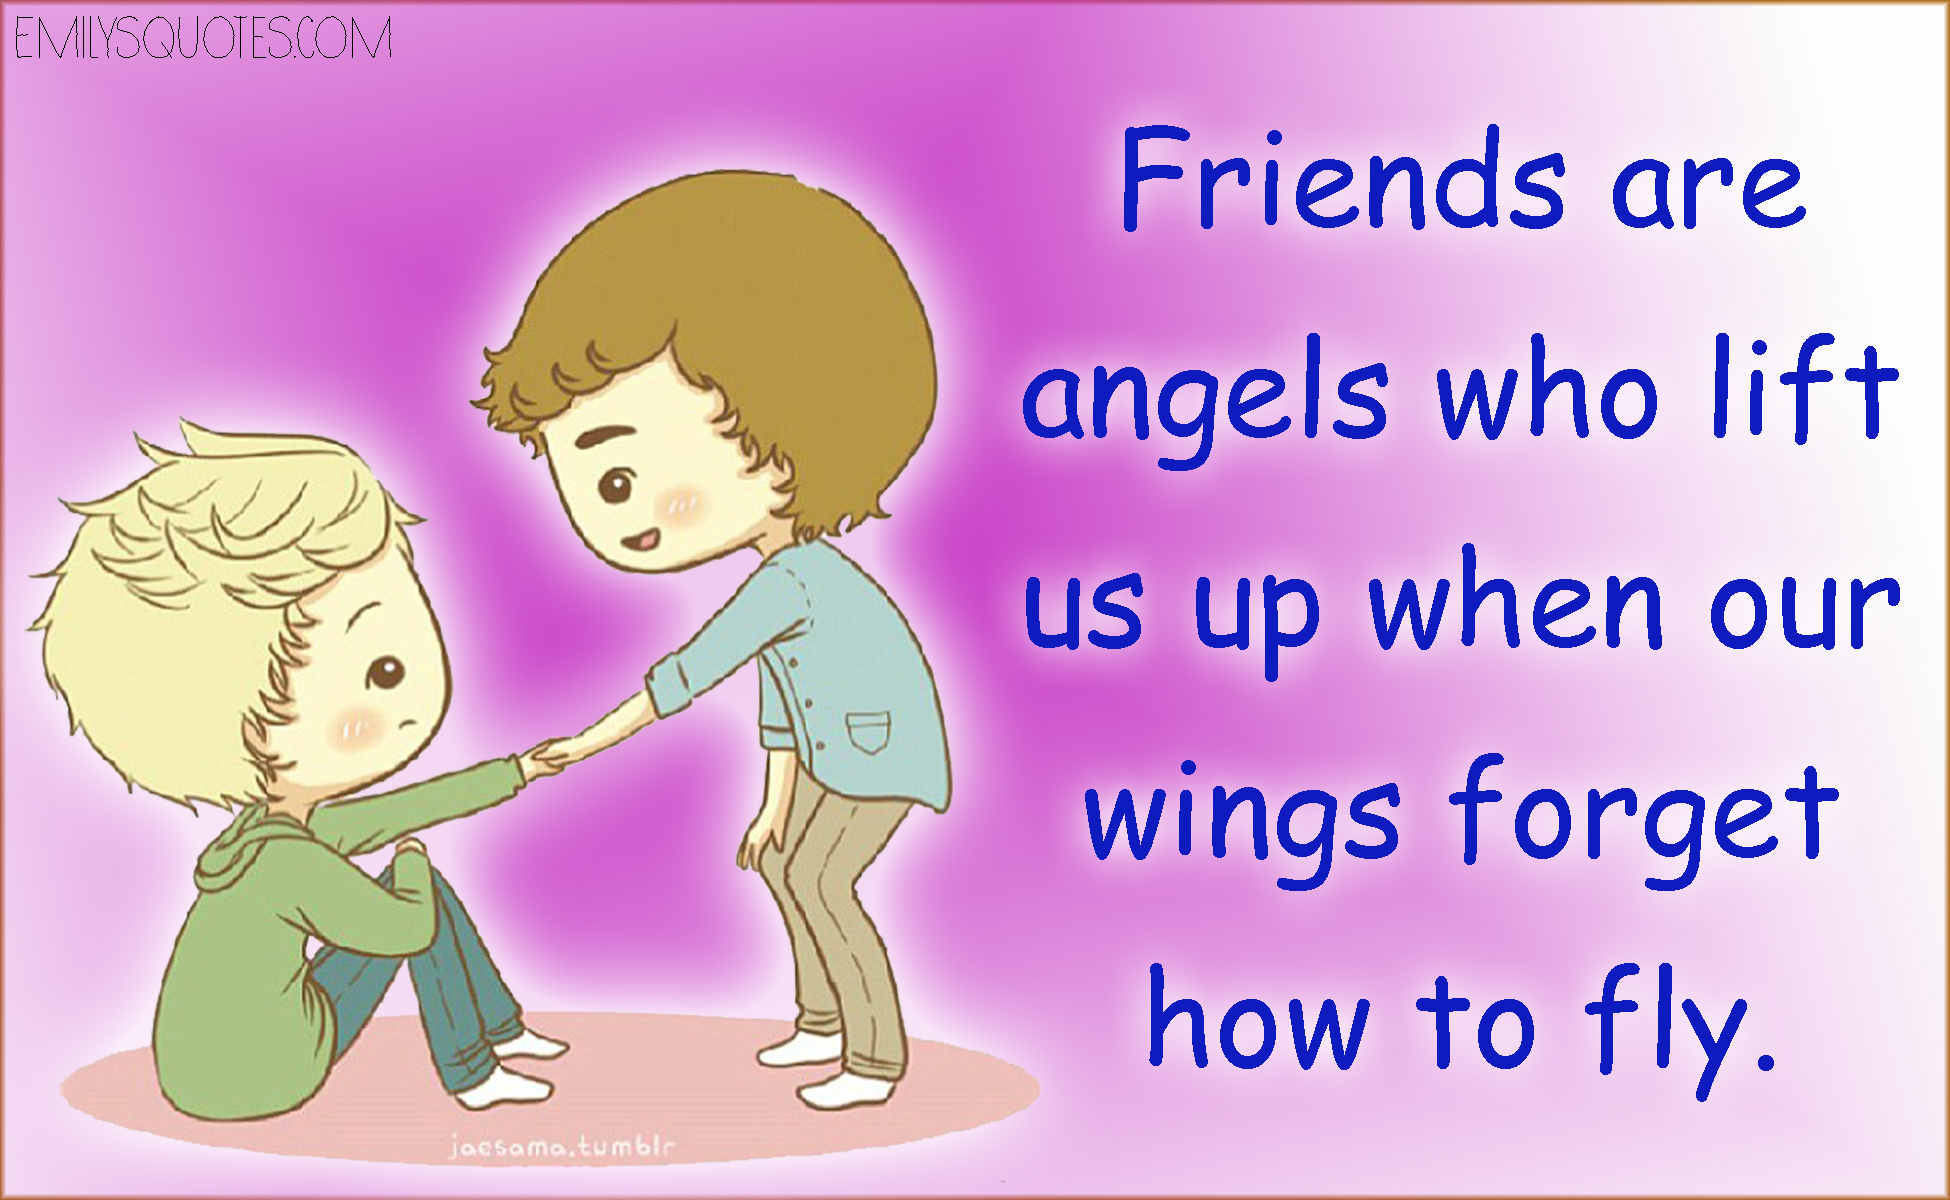 Friends are angels who lift us up when our wings forget how to fly